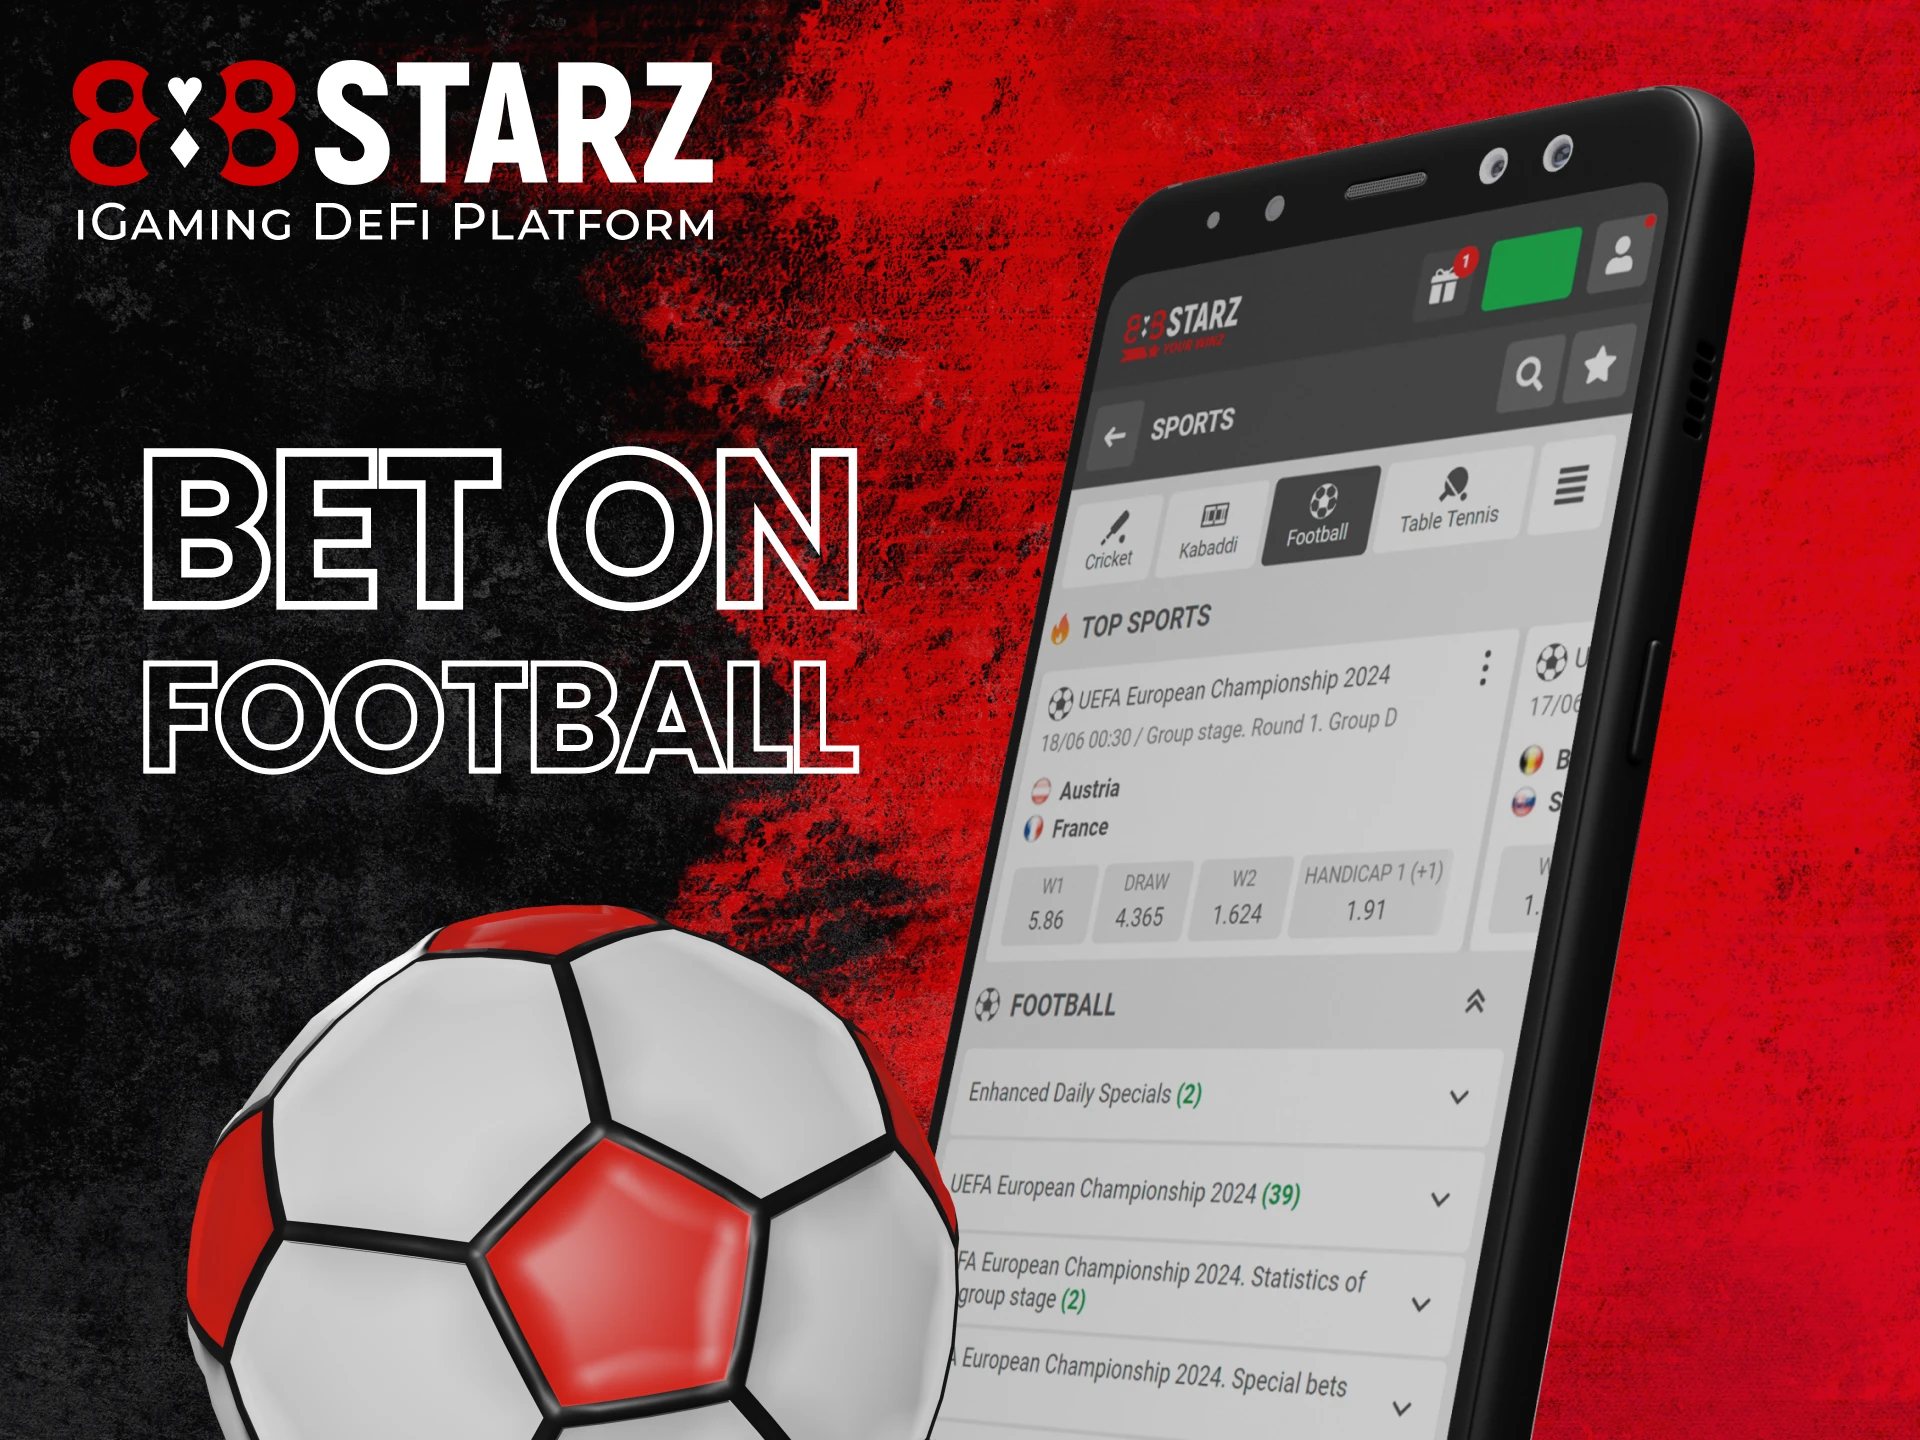 The 888Starz mobile app has a variety of different football events to bet on.